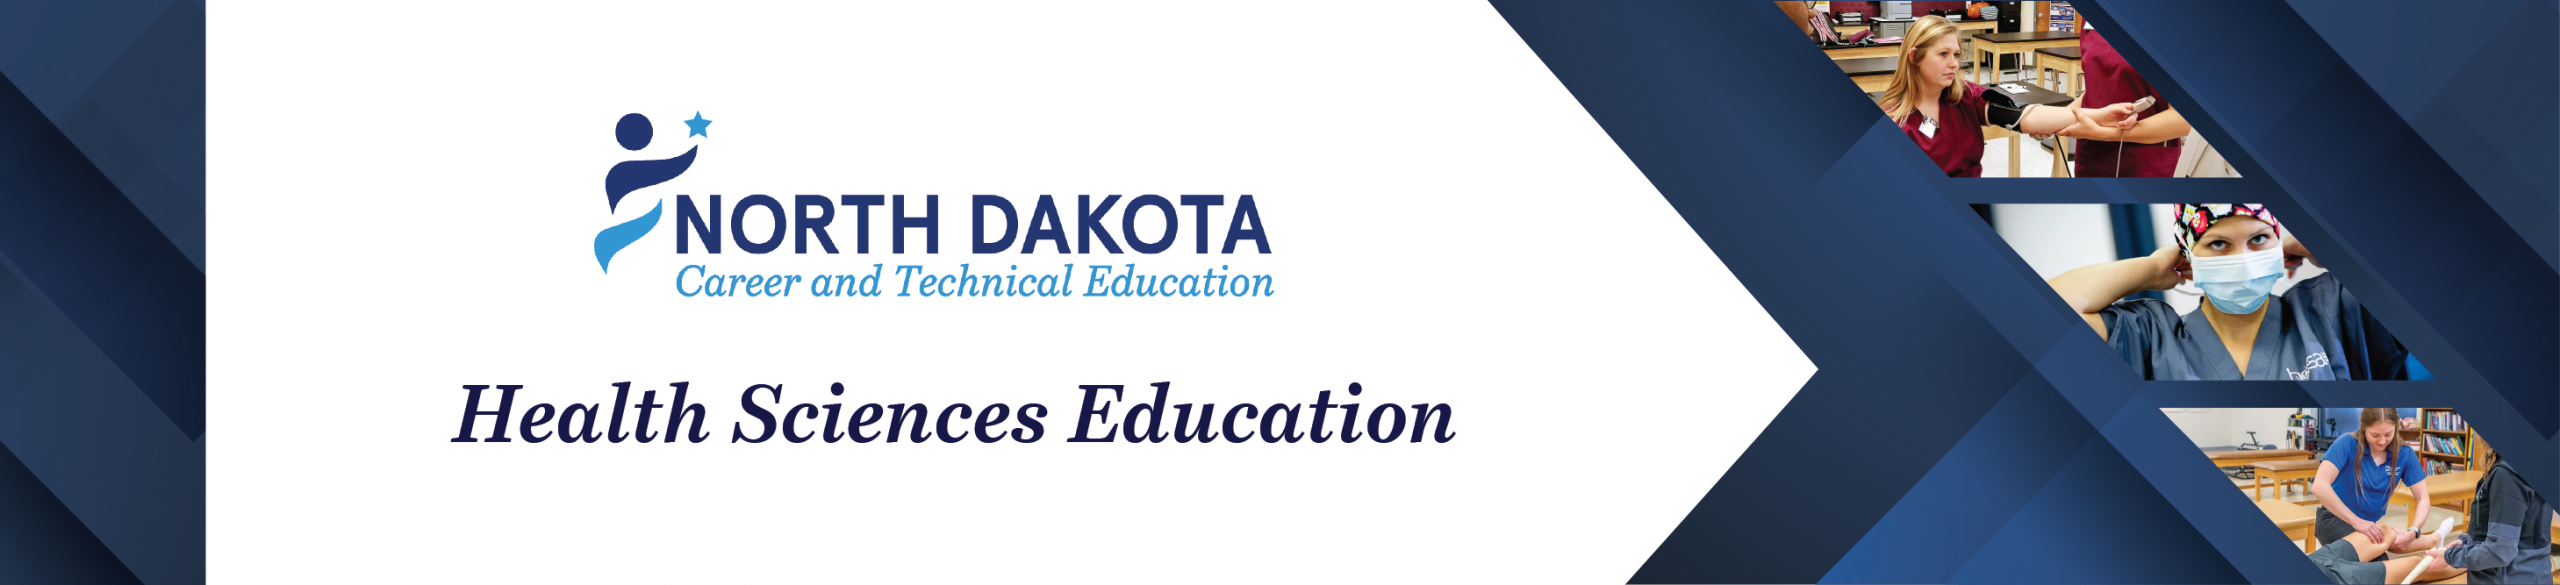 Health Sciences Education Banner with Images